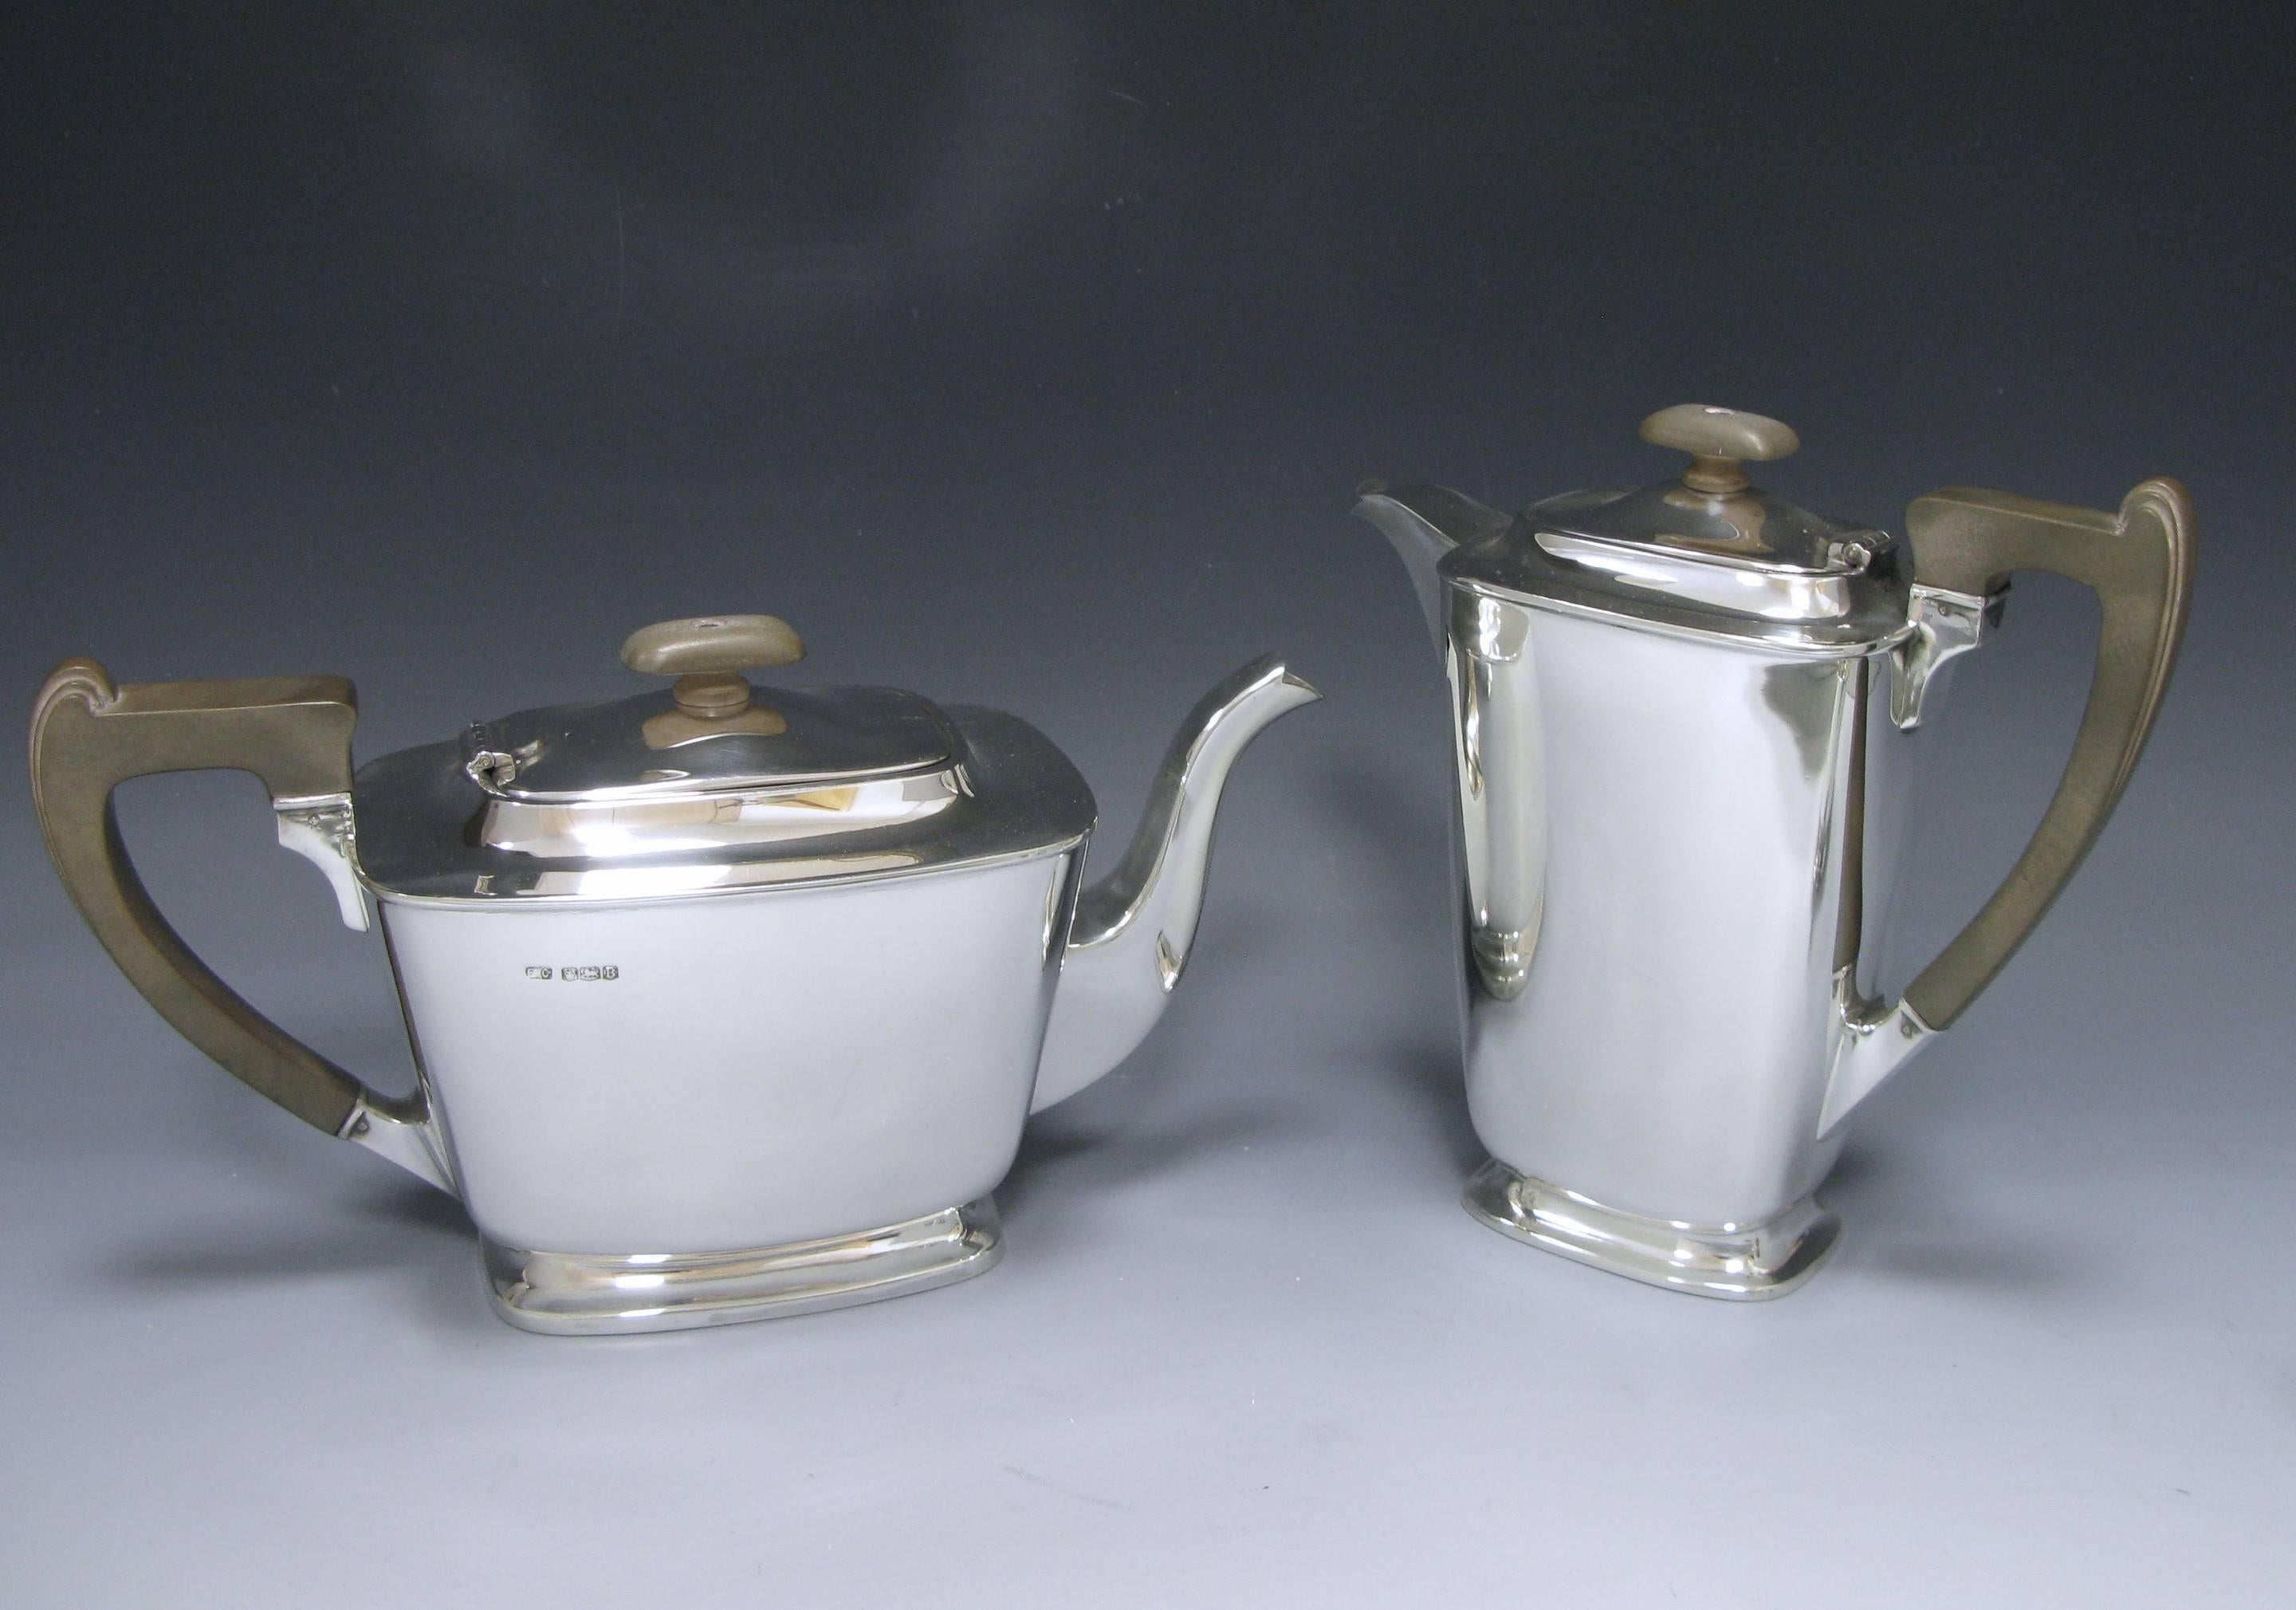 A four-piece sterling silver tea and coffee service of plain elegant form, the tea and coffee pots have caves wooden handles and finials height of coffee pot 6.5 inches, 16.5 cm, height of tea pot 4.75 inches 12 cm, cream jug 3.50 inches, 9 cm sugar